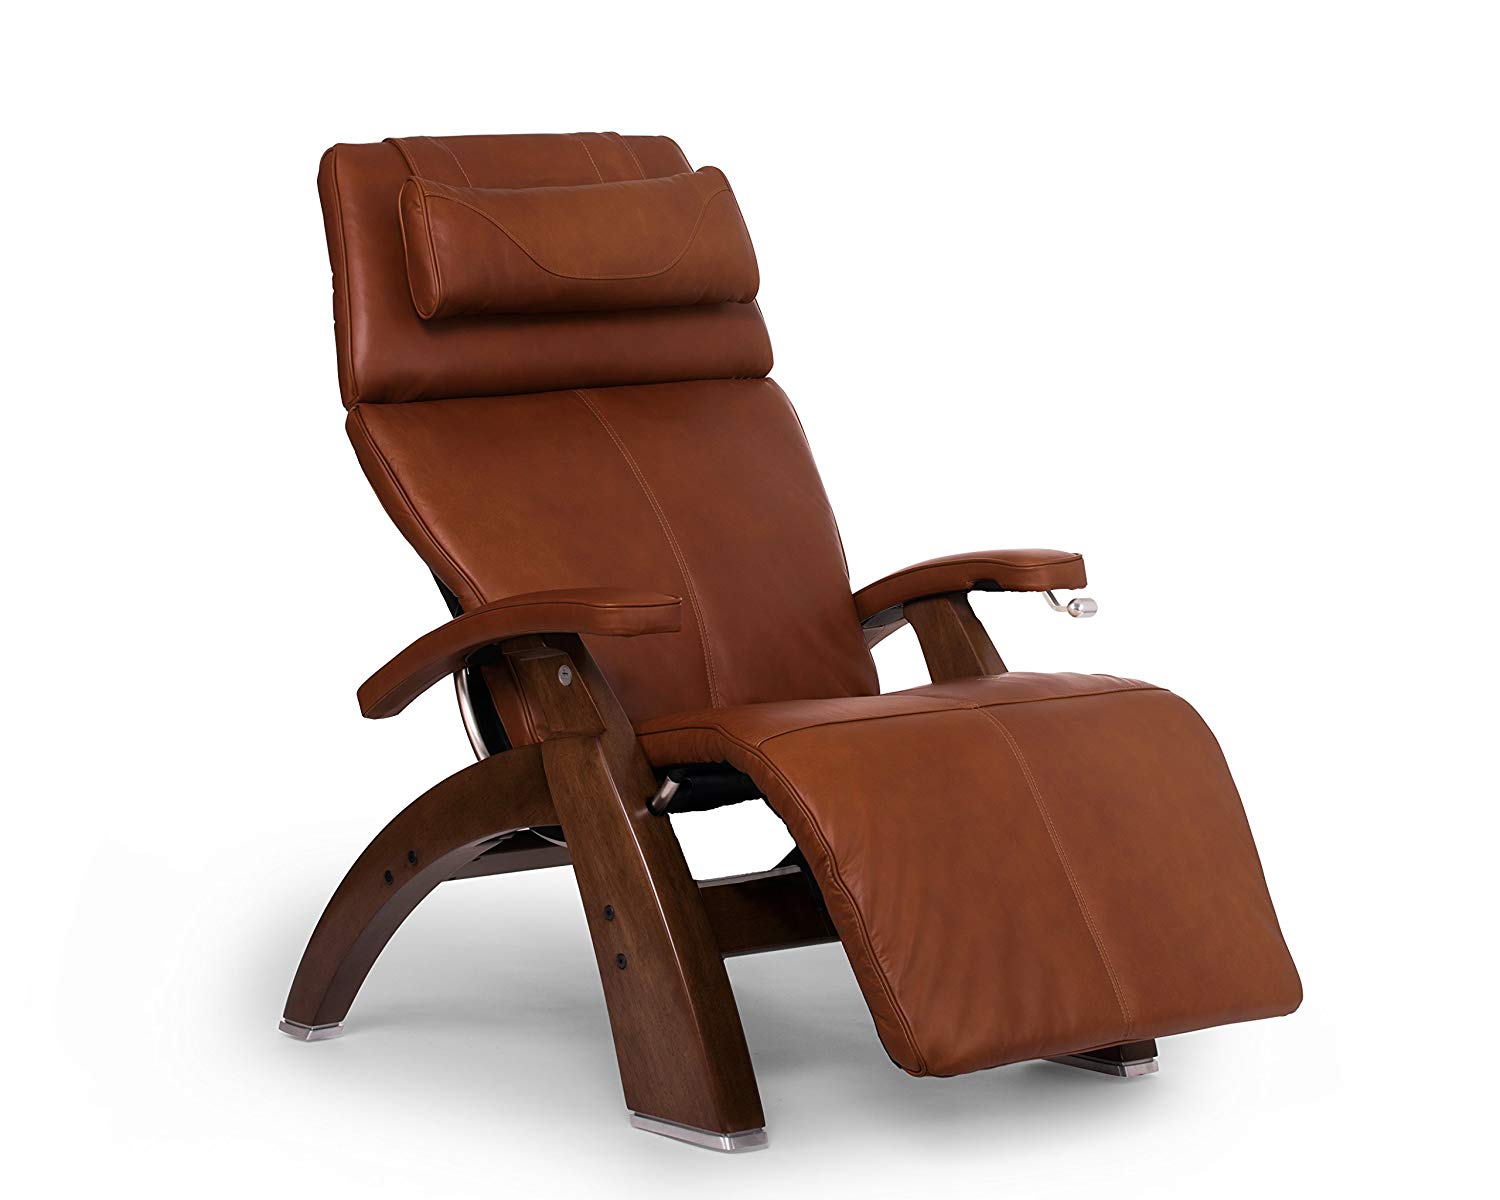 8 Best High End Recliners Dec 2021, Luxury Leather Recliners